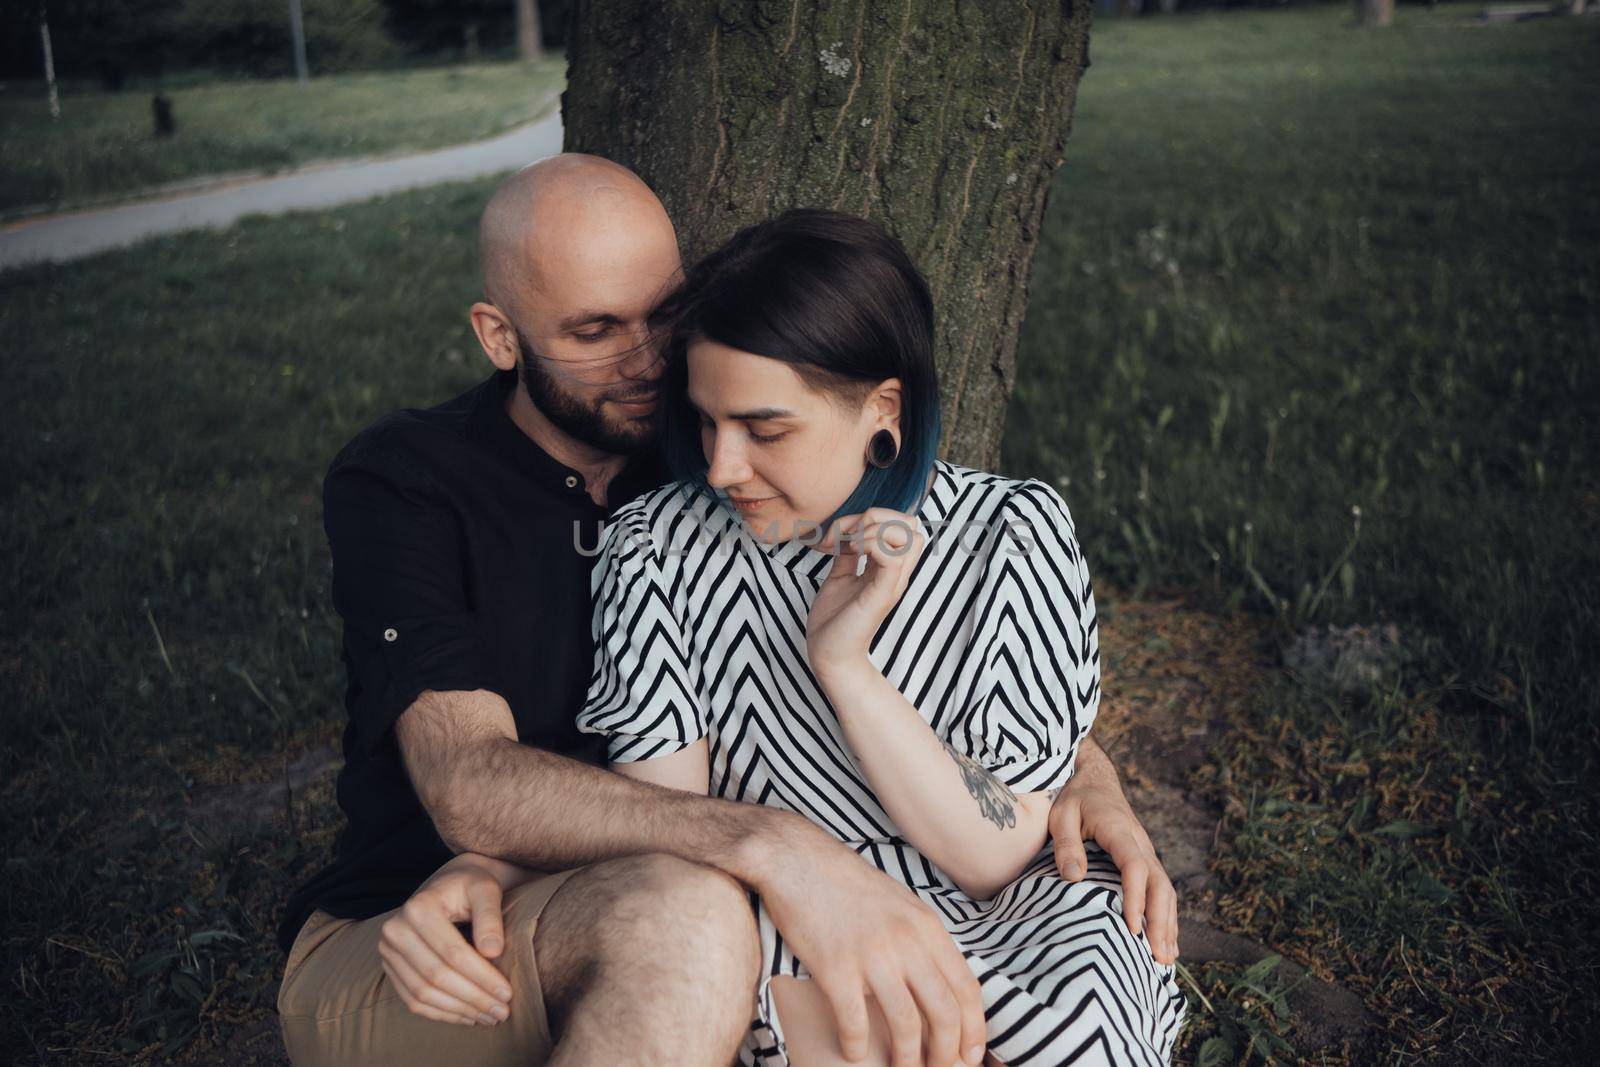 lovers sit in the park under a tree, talk and hug by Symonenko